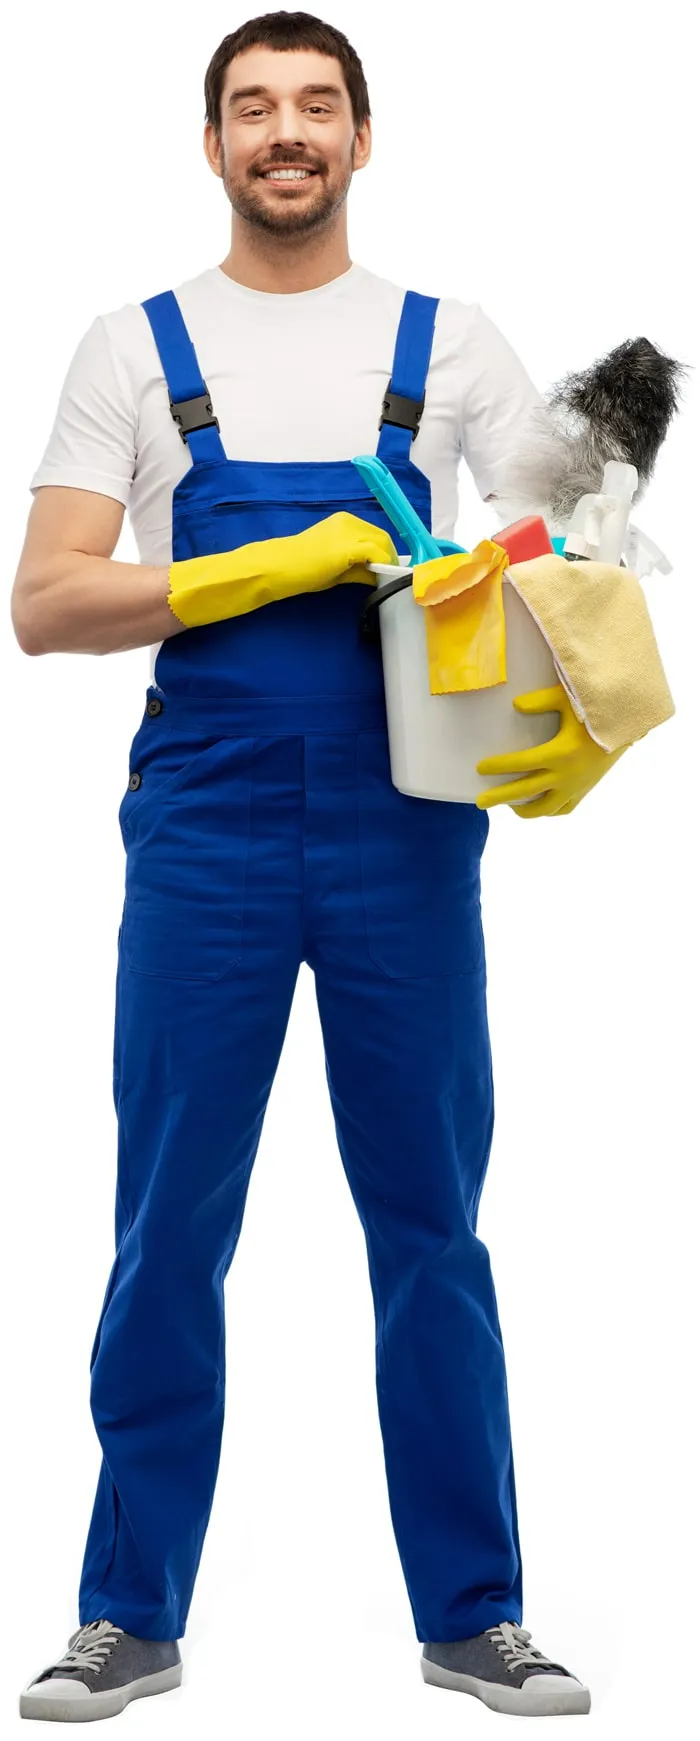 happy smiling male worker or cleaner in overal and gloves with cleaning supplies over white background